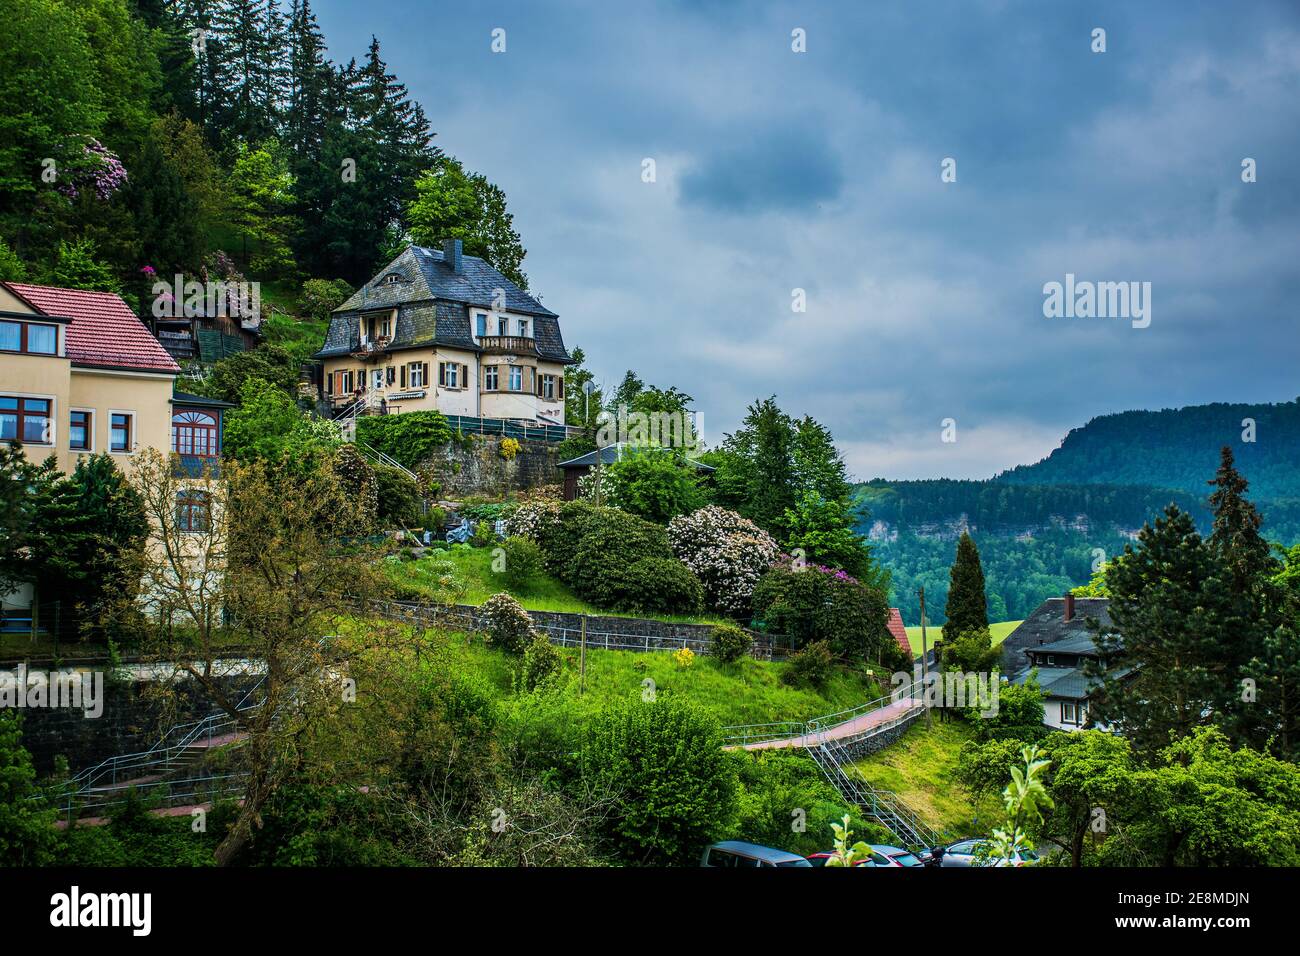 18 May 2019 Rathen, Saxony, Germany - Narrow mountain paths and cozy residential houses at Kurort Rathen, small town on river Elbe, opposite to Bastei Stock Photo